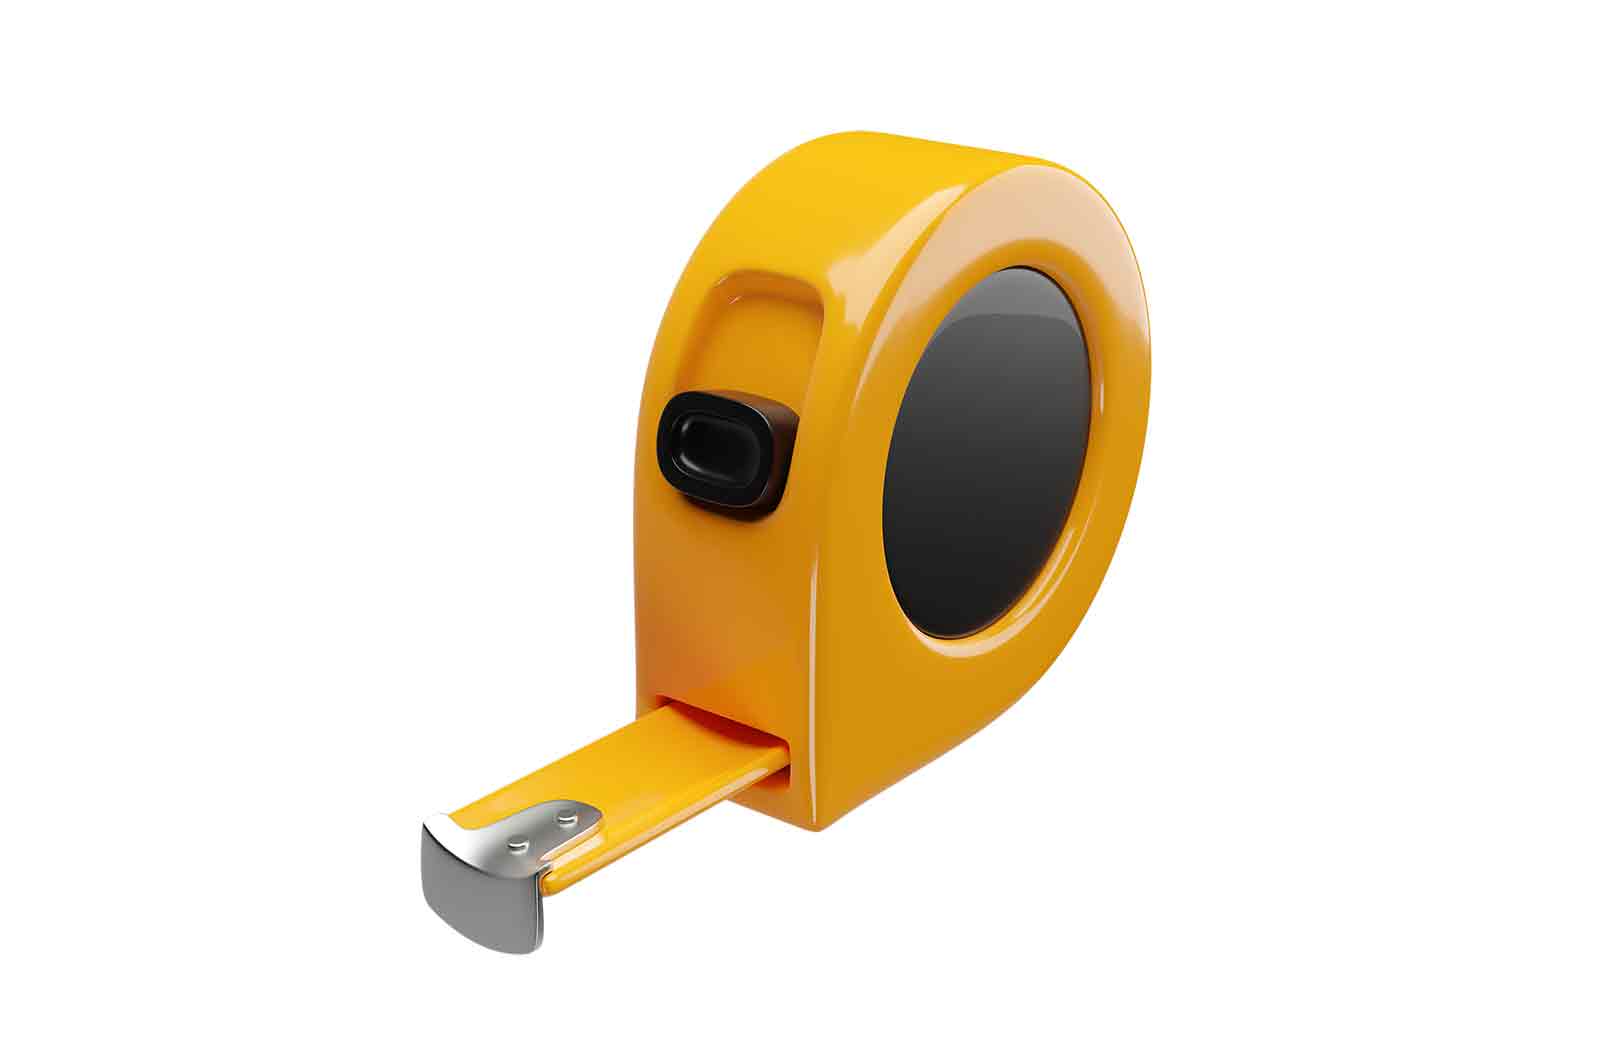 Yellow tape measure on white background, 3d rendered illustration. A flexible ruler that is used for measuring length or distance.